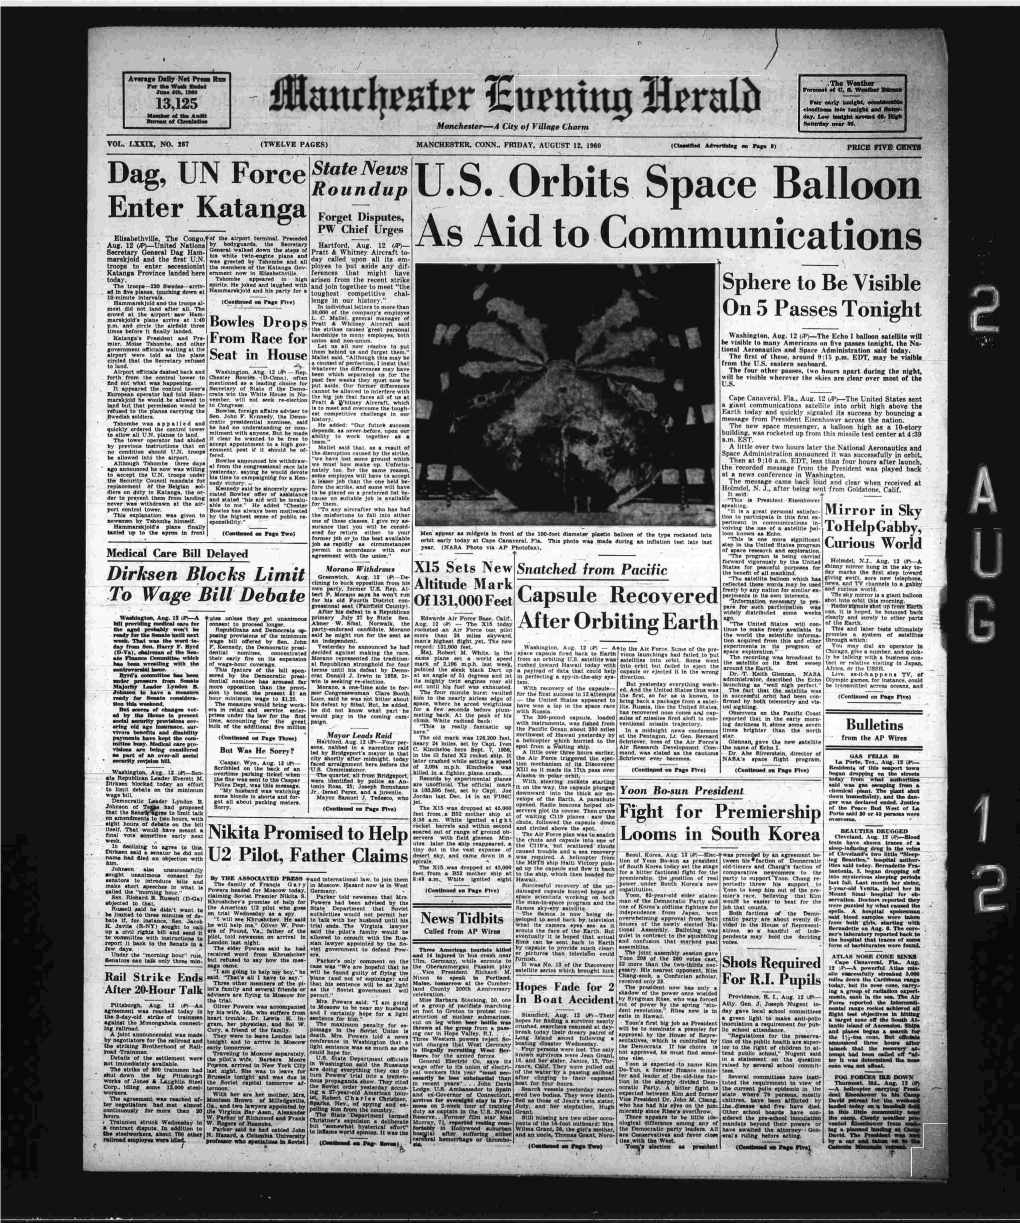 U. S. Orbits Space Balloon As Aid to Communications